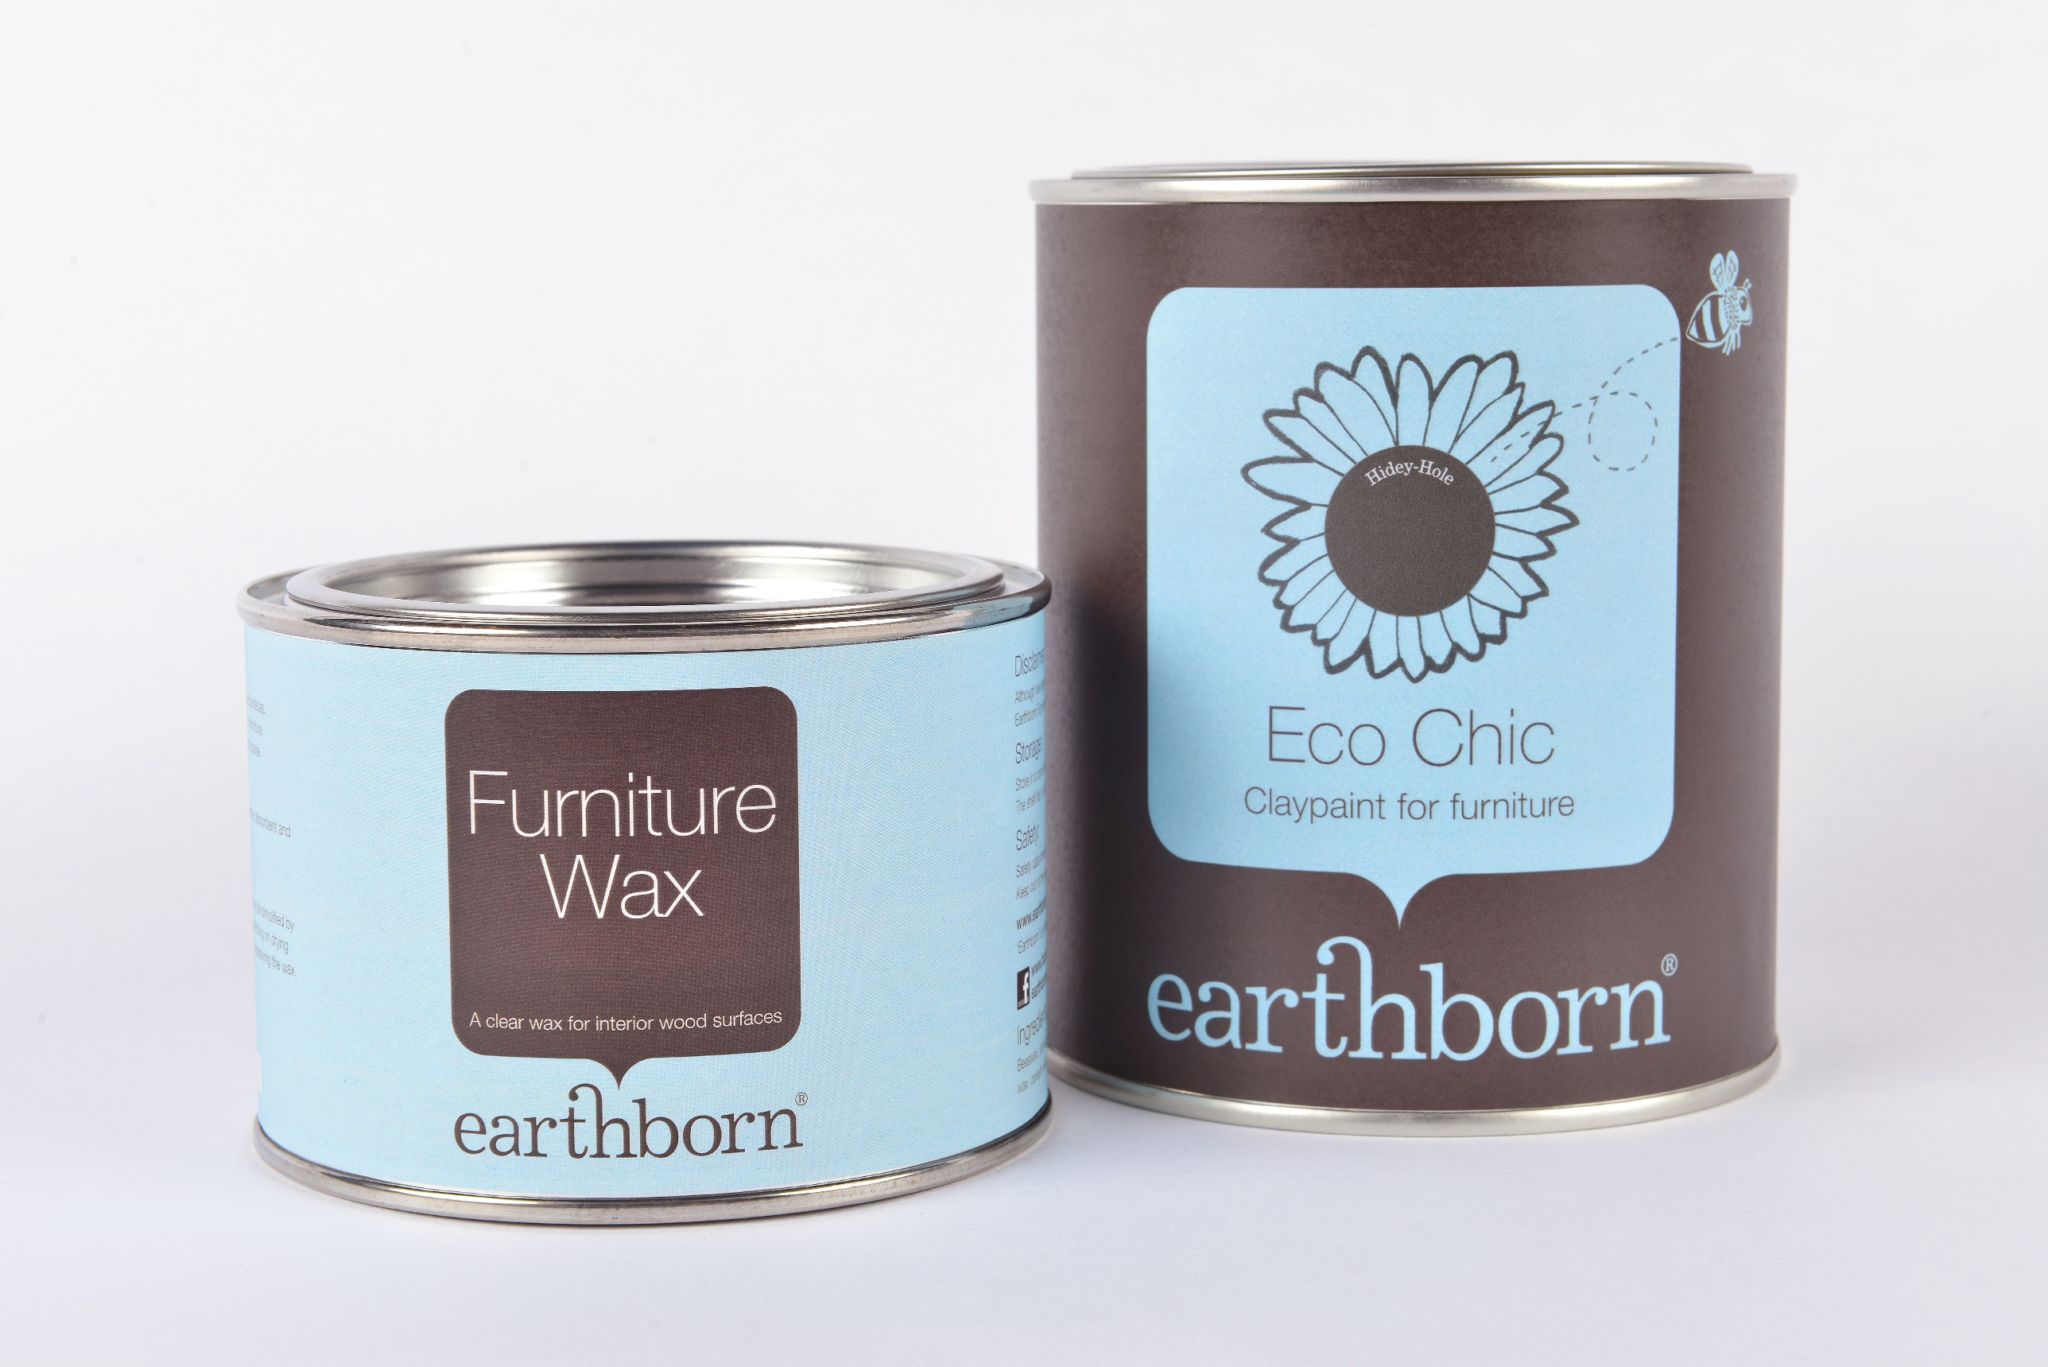 Earthborn Eco Chic is a breathable, thick, creamy paint for furniture. It's safe for children's cots and toys too!